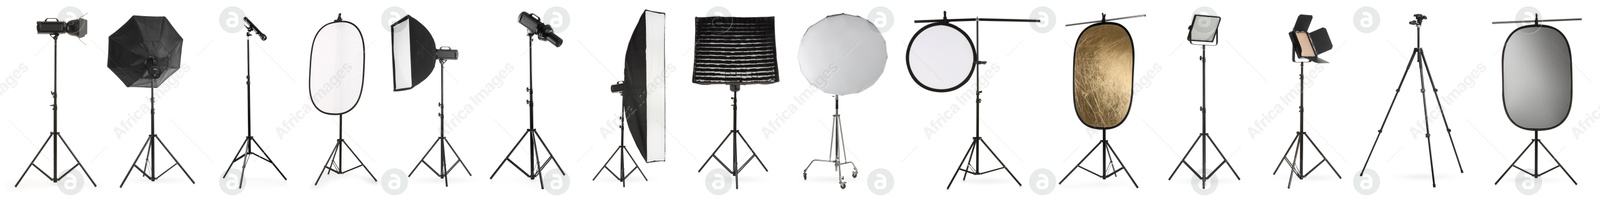 Image of Set of different professional photo studio equipment isolated on white